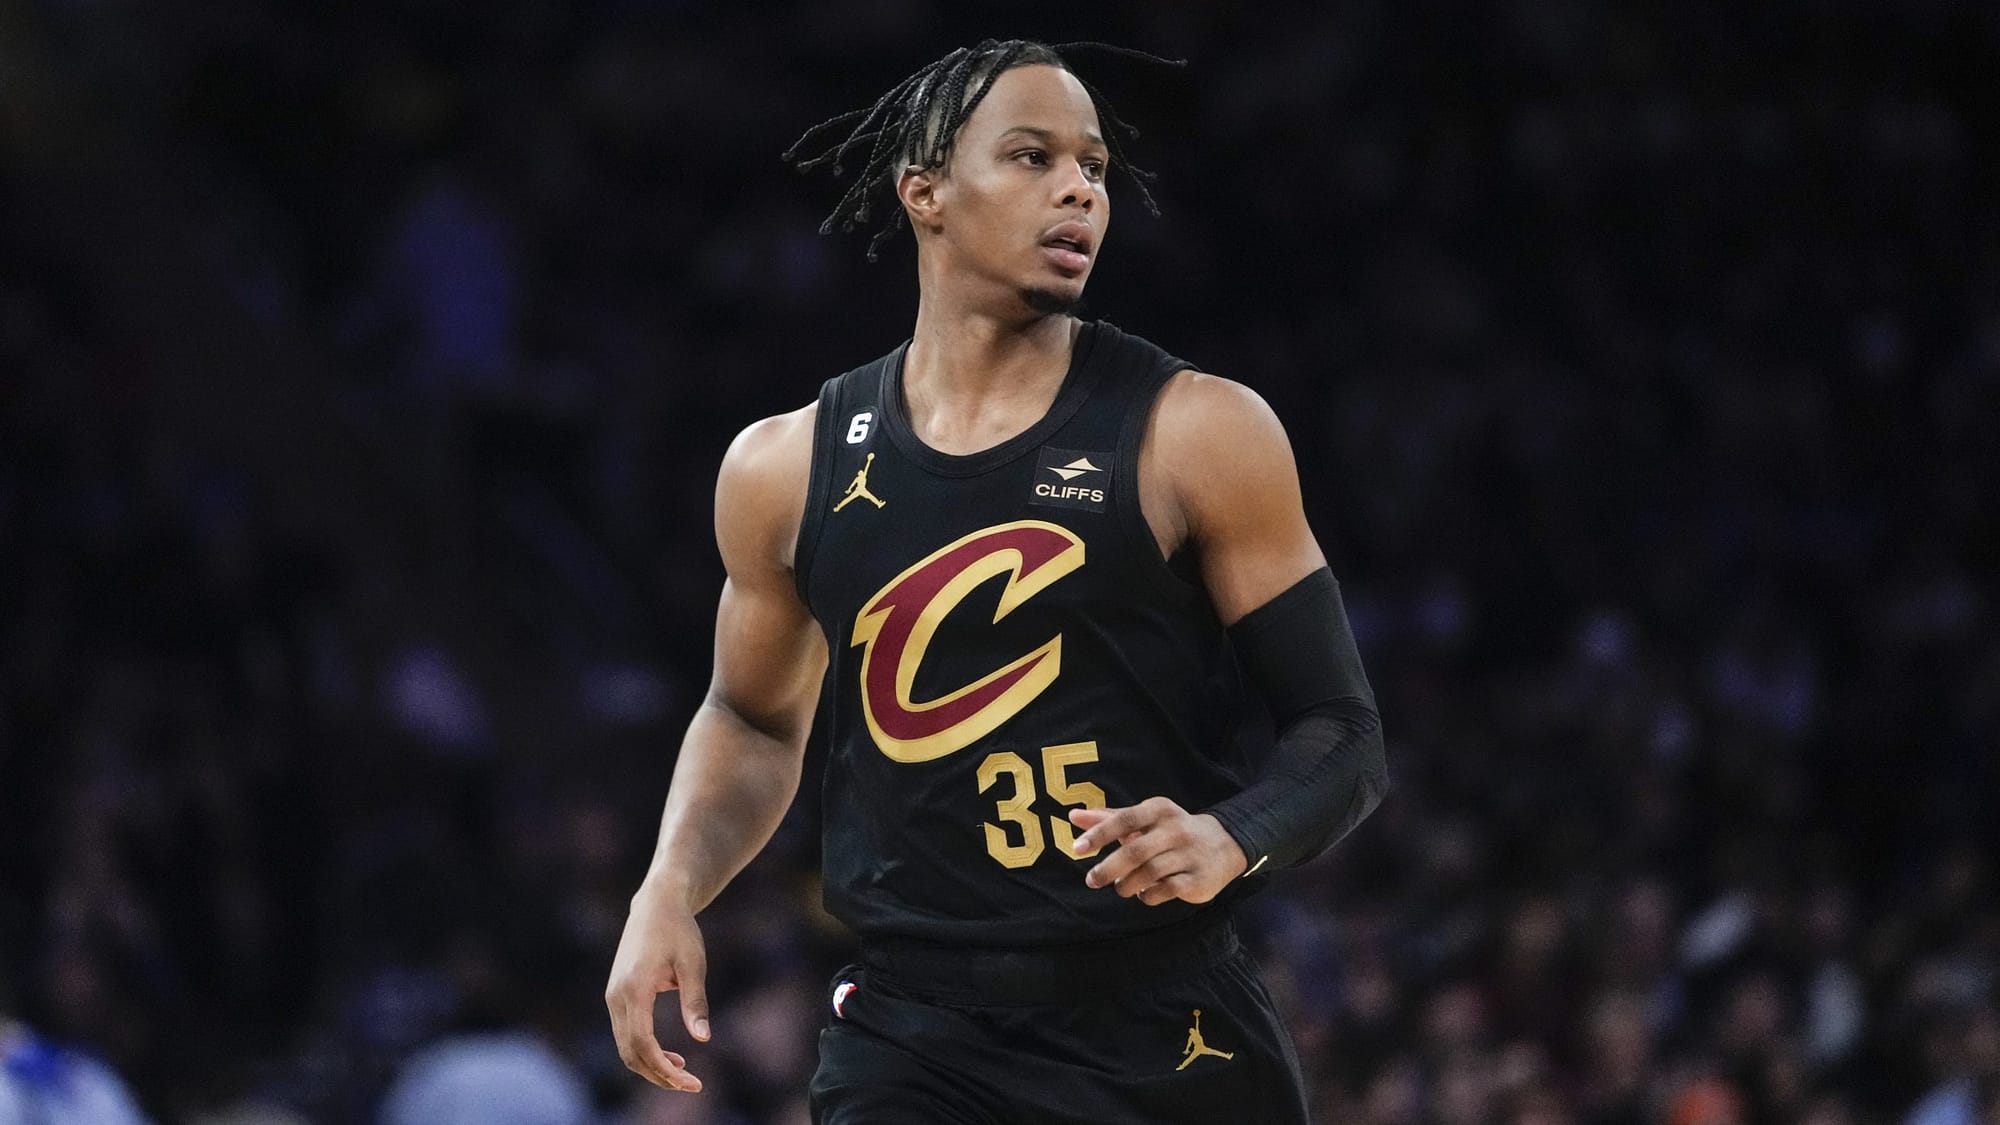 Cleveland visits Brooklyn on Tuesday, and an NBA Cavaliers-Netsplayer prop for Isaac Okoro's shooting has value due to this trend...